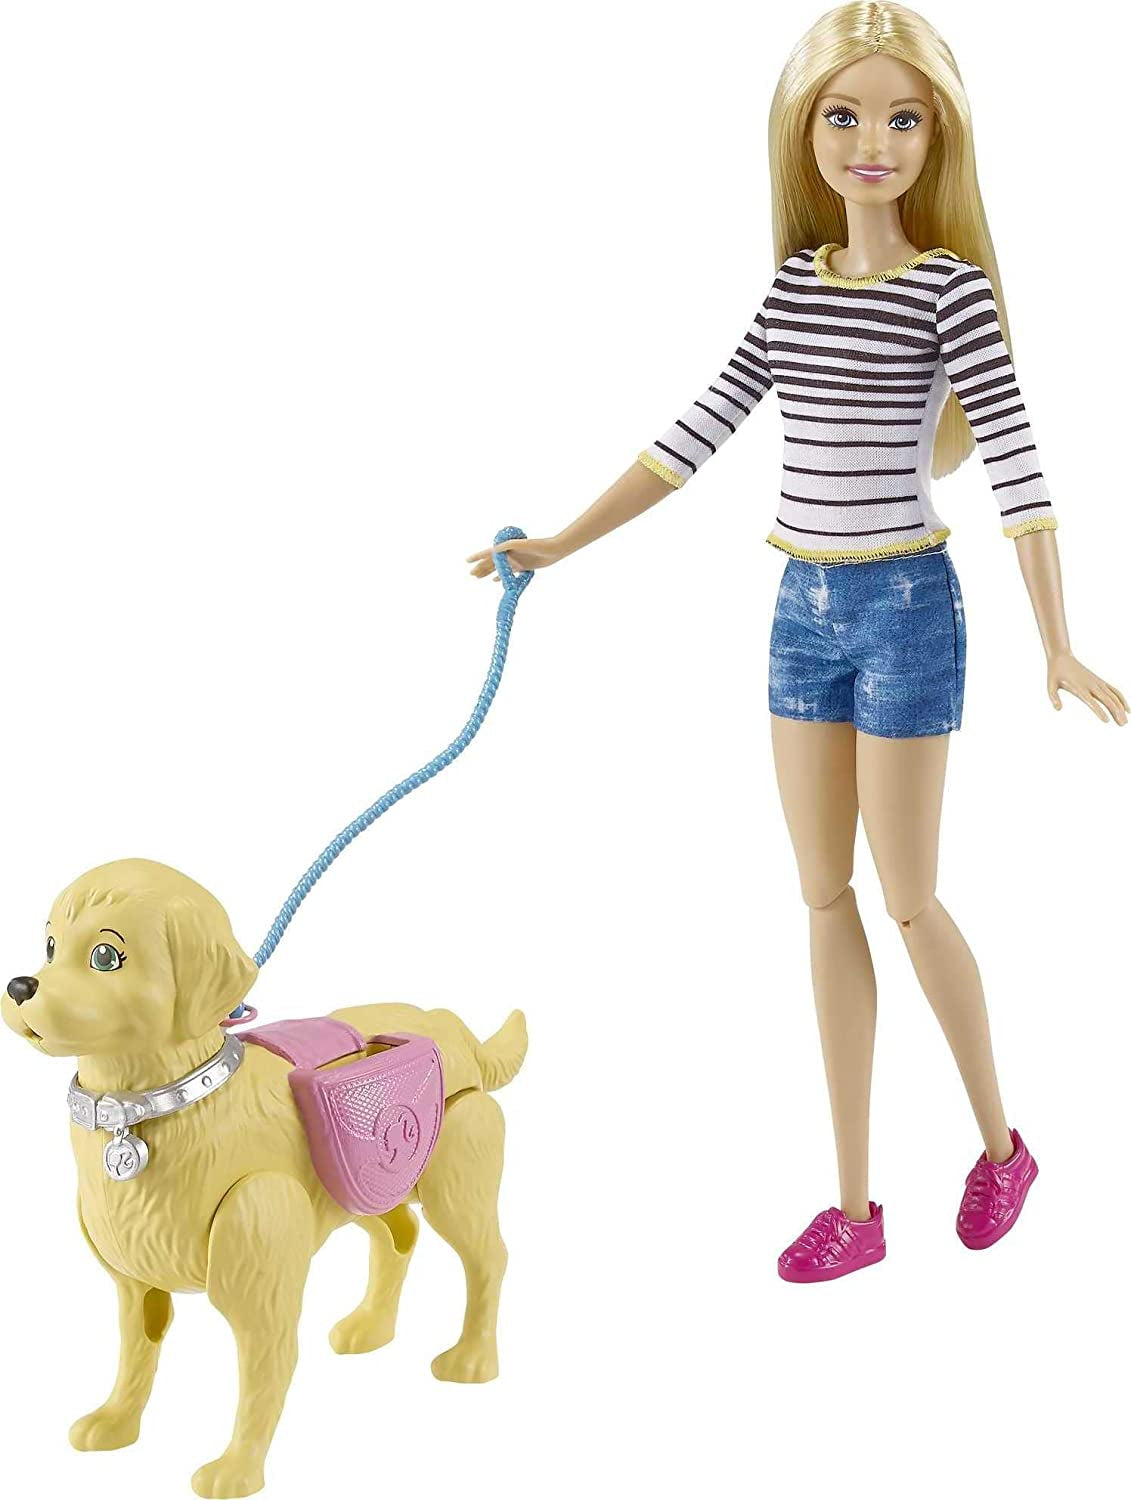 , Walk and Potty Pup, Doll and Potty Training Puppy, for Ages +3 Years Old, DWJ68